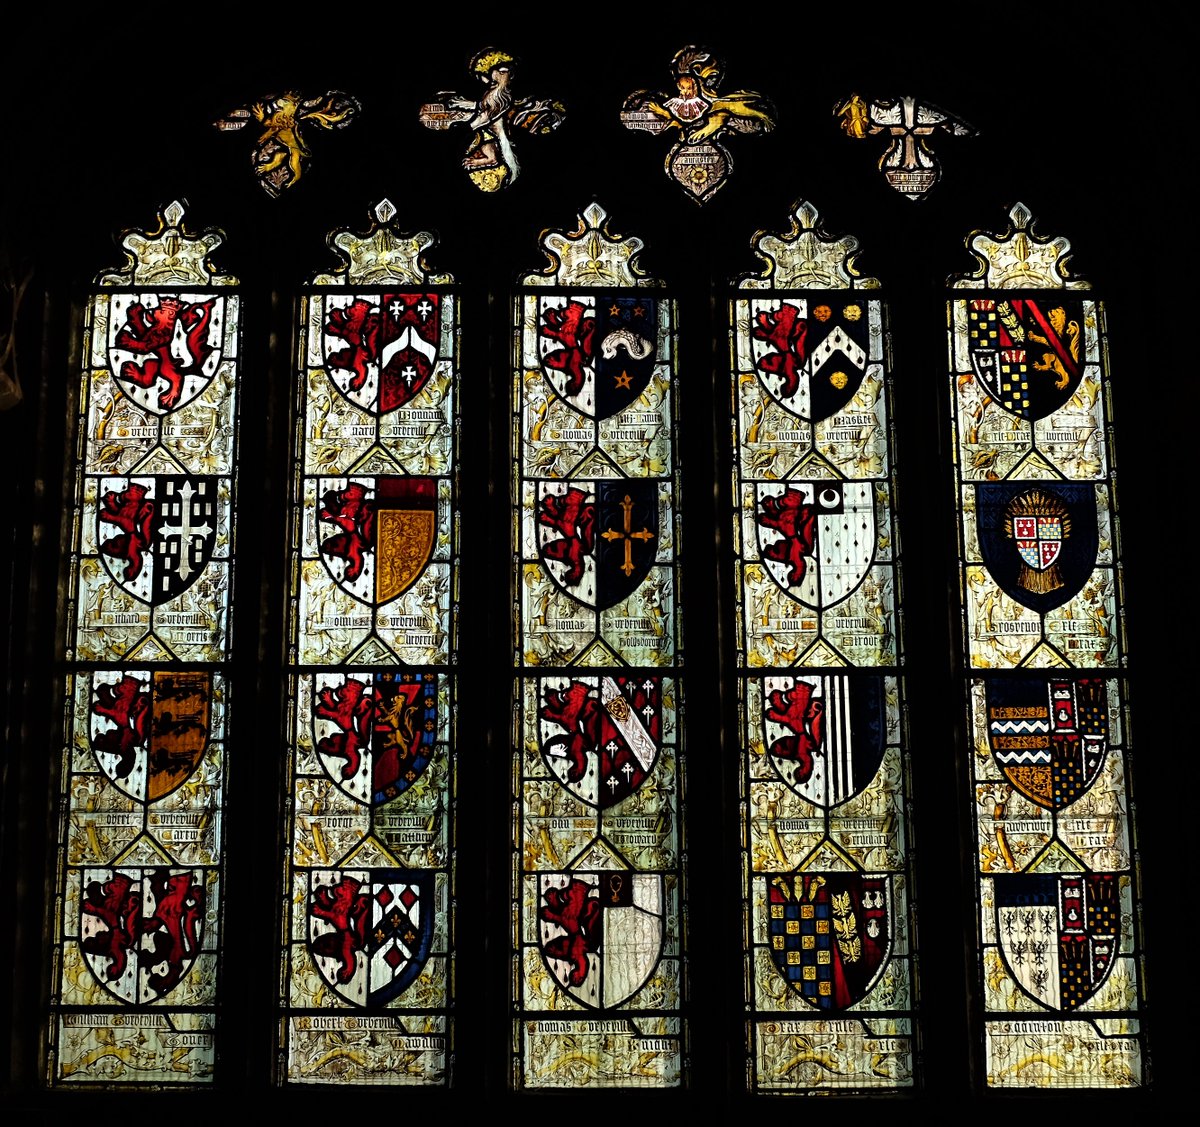 Now that the name #TinyLionsAppreciationSociety has been decided(?), a plethora of #tinylions in this armorial window of Turberville family, Bere Regis #Dorset, restored 1875-7 by Hardman from what was recorded in 1600.